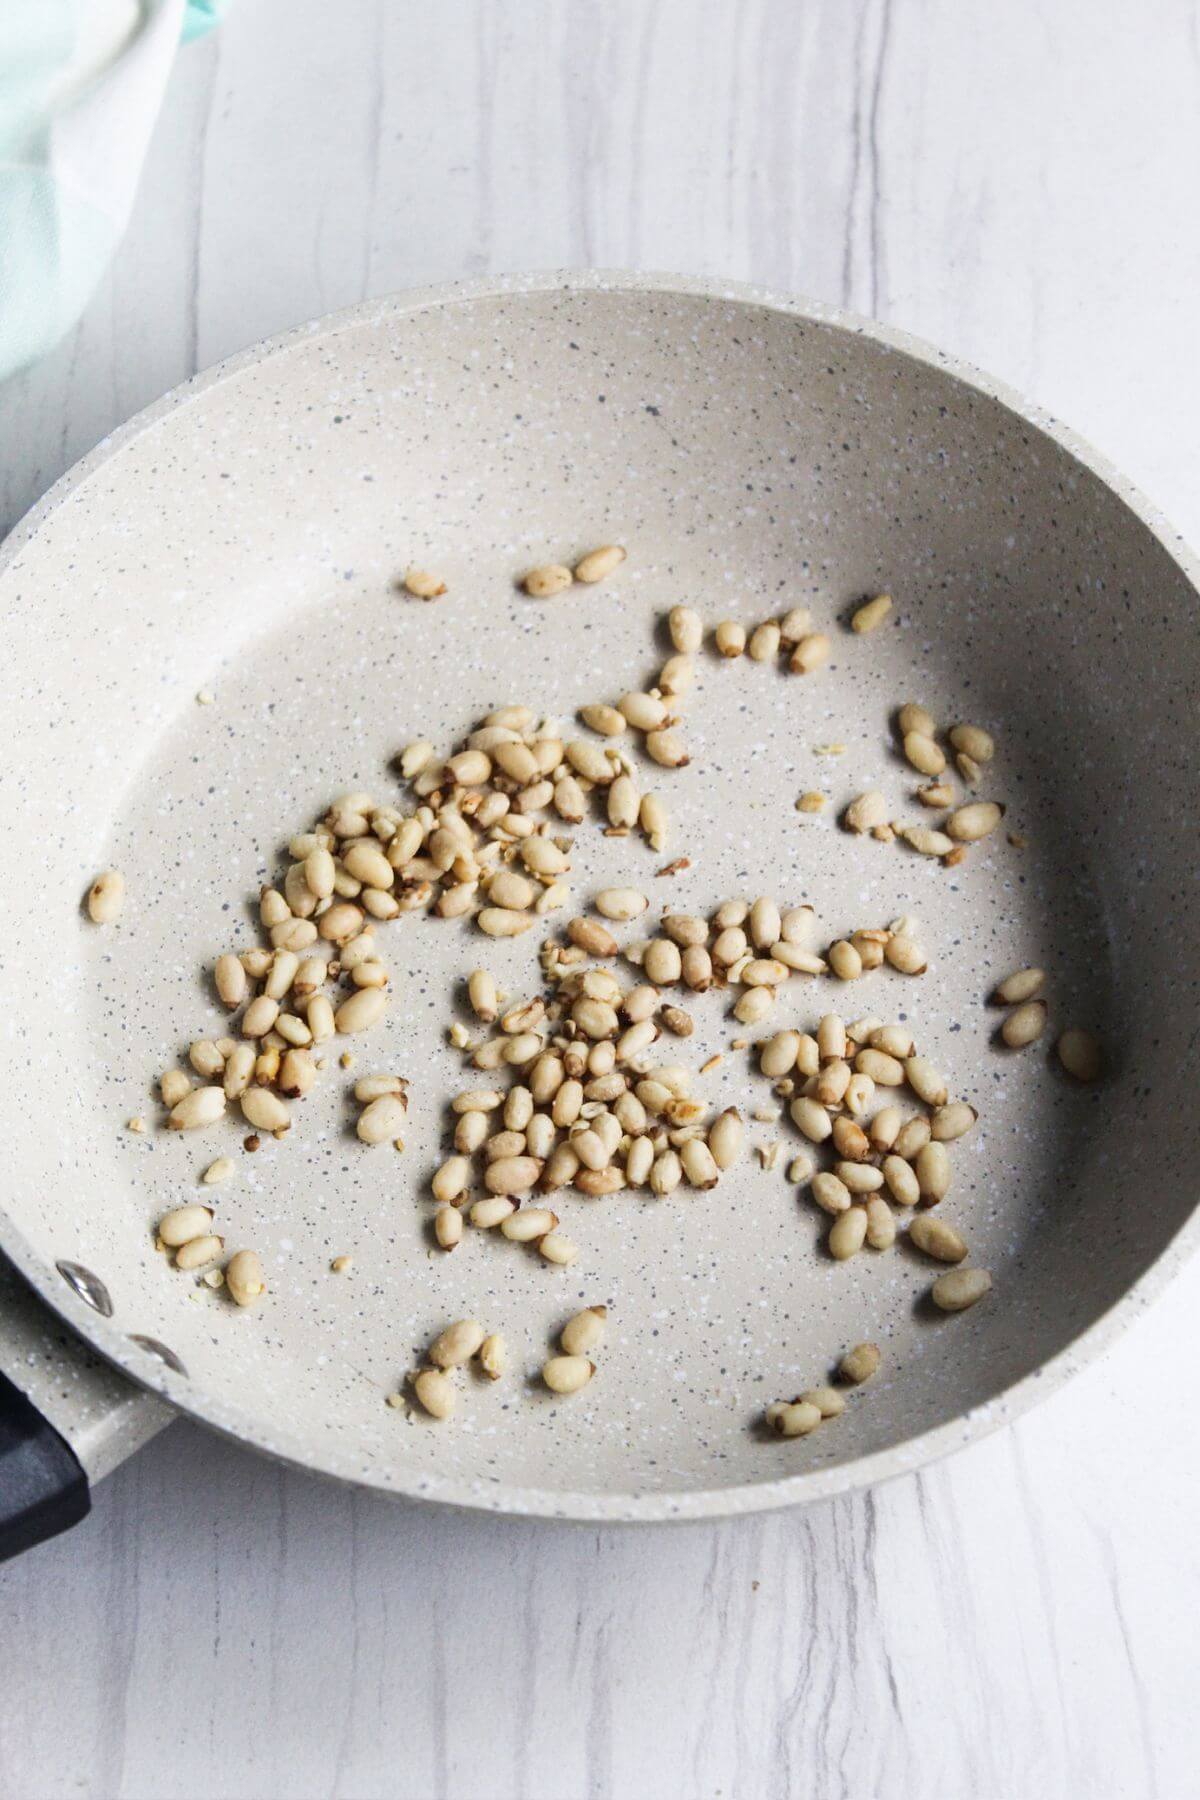 A frying pan with pine nuts in it.